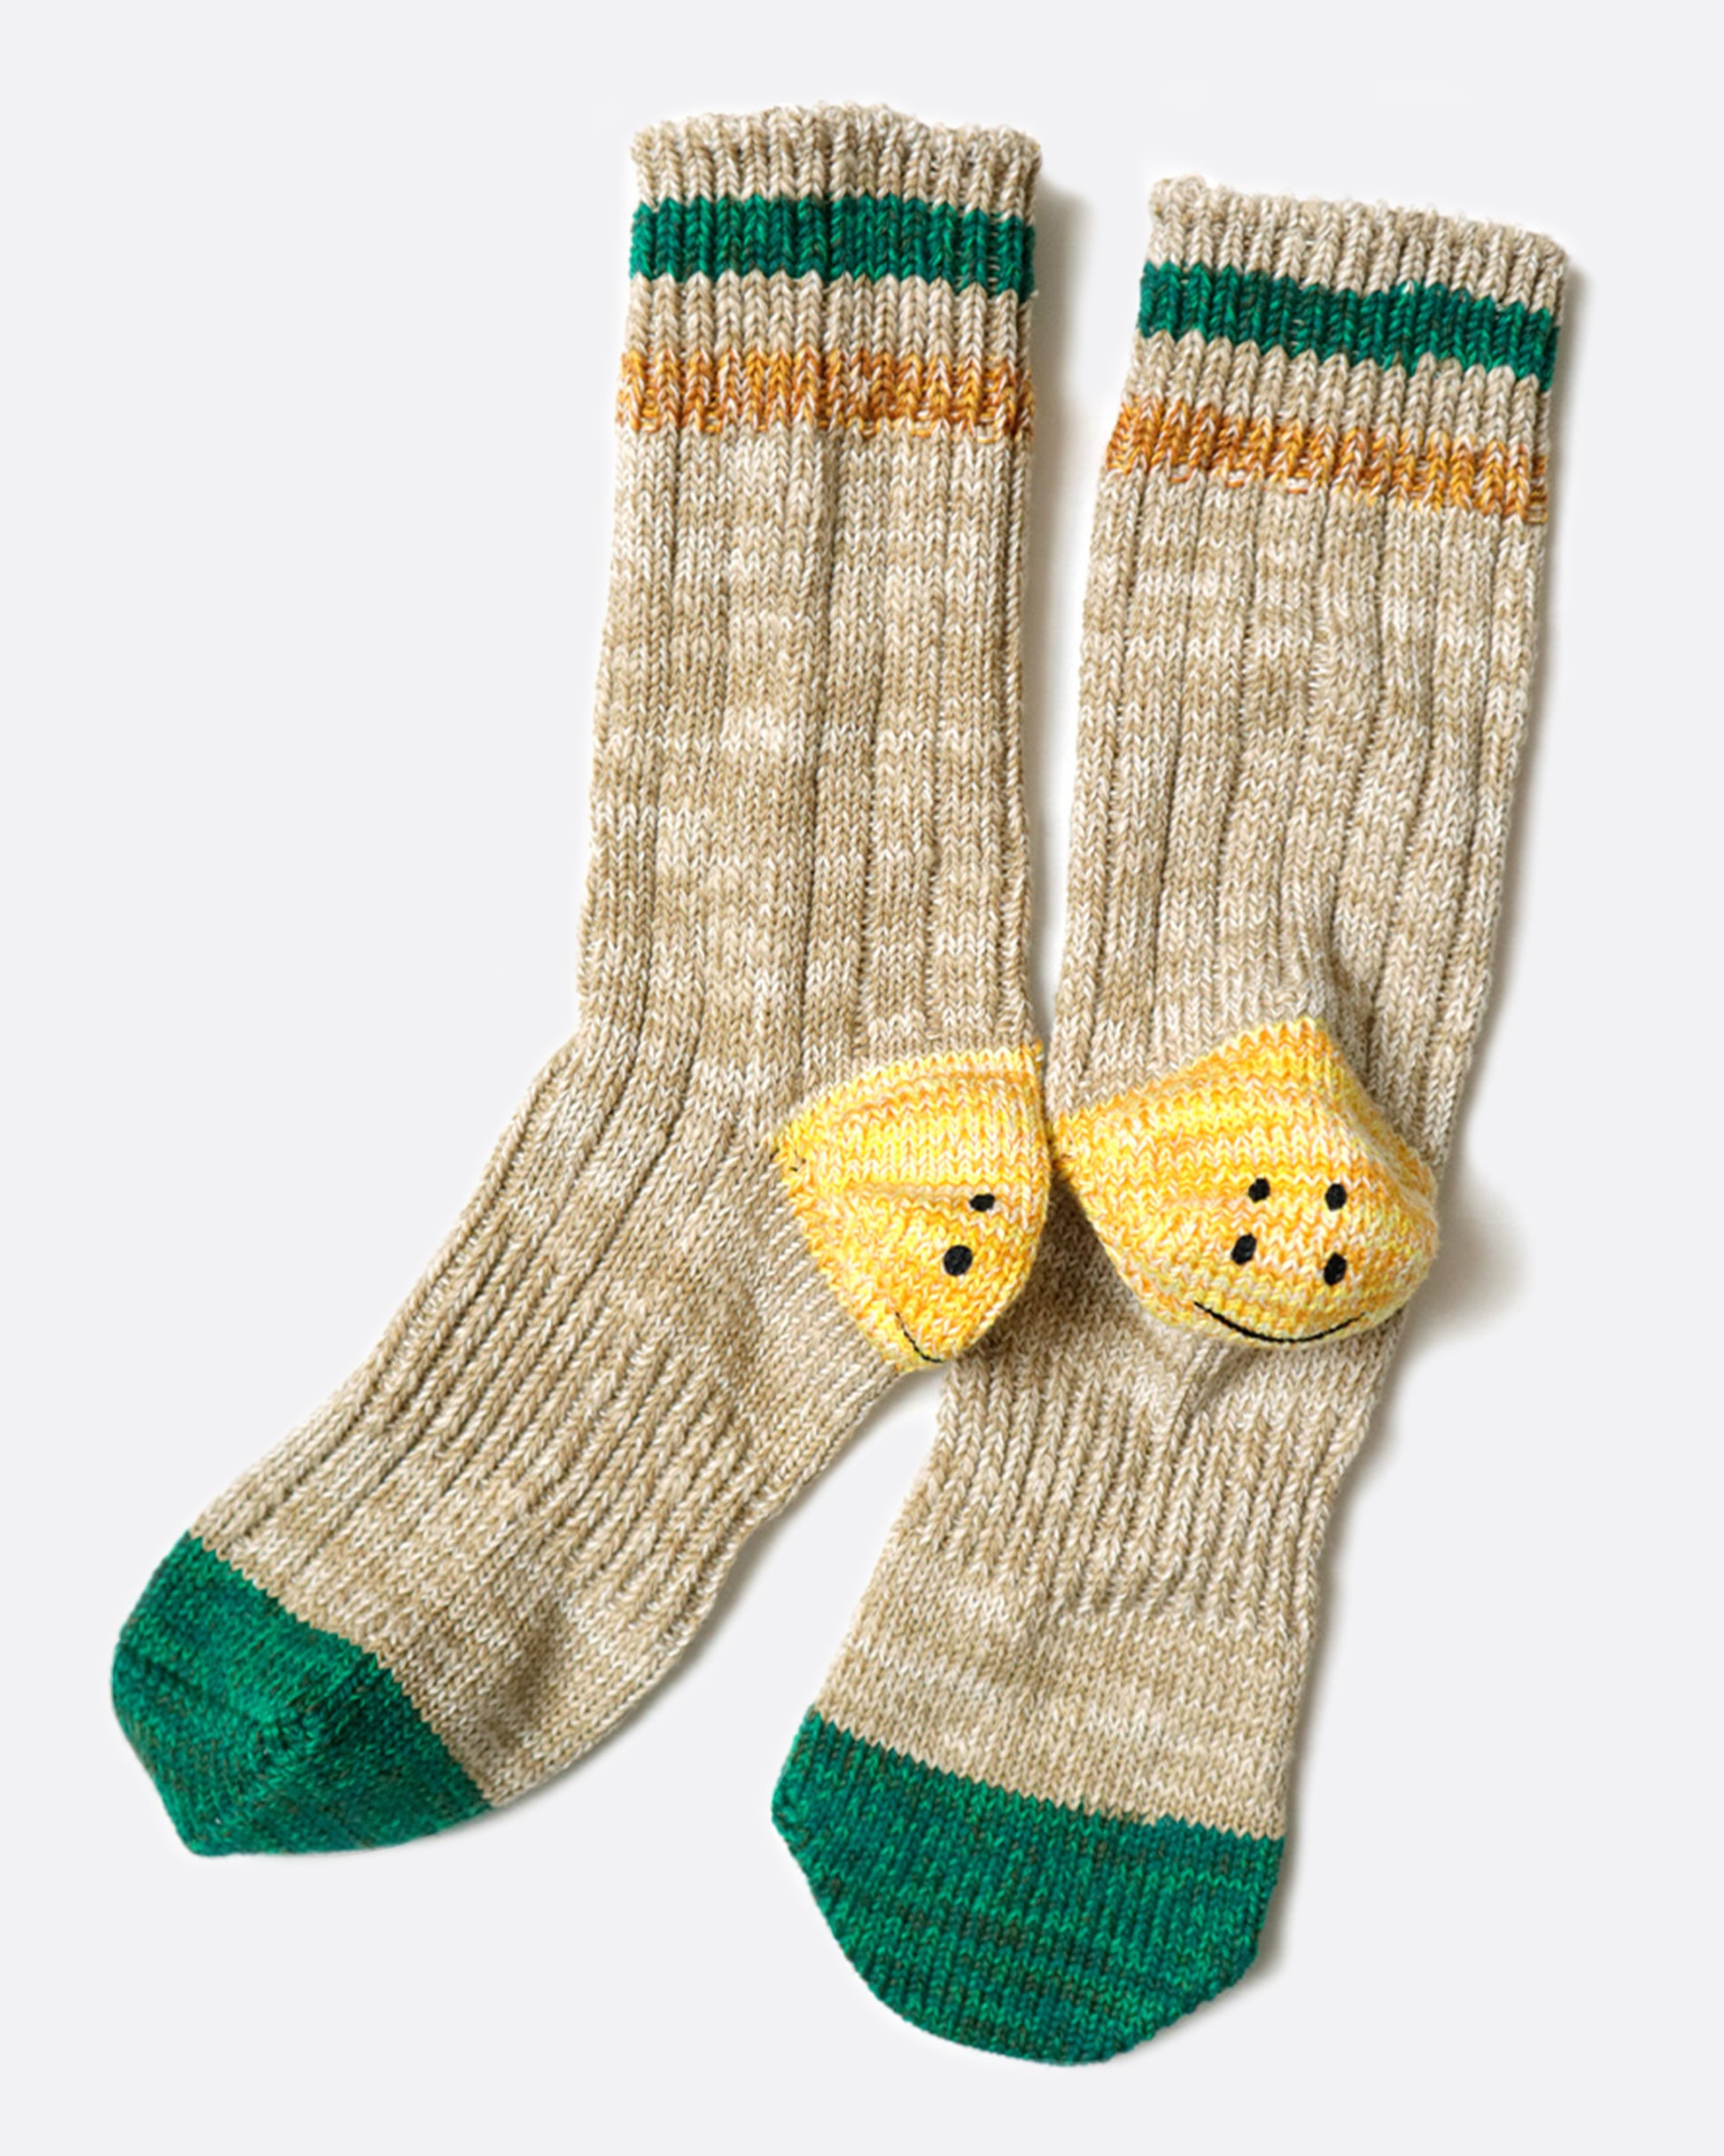 A pair of beige ribbed tube socks with green toe caps and yellow smiley heels, shown laying flat from the side.